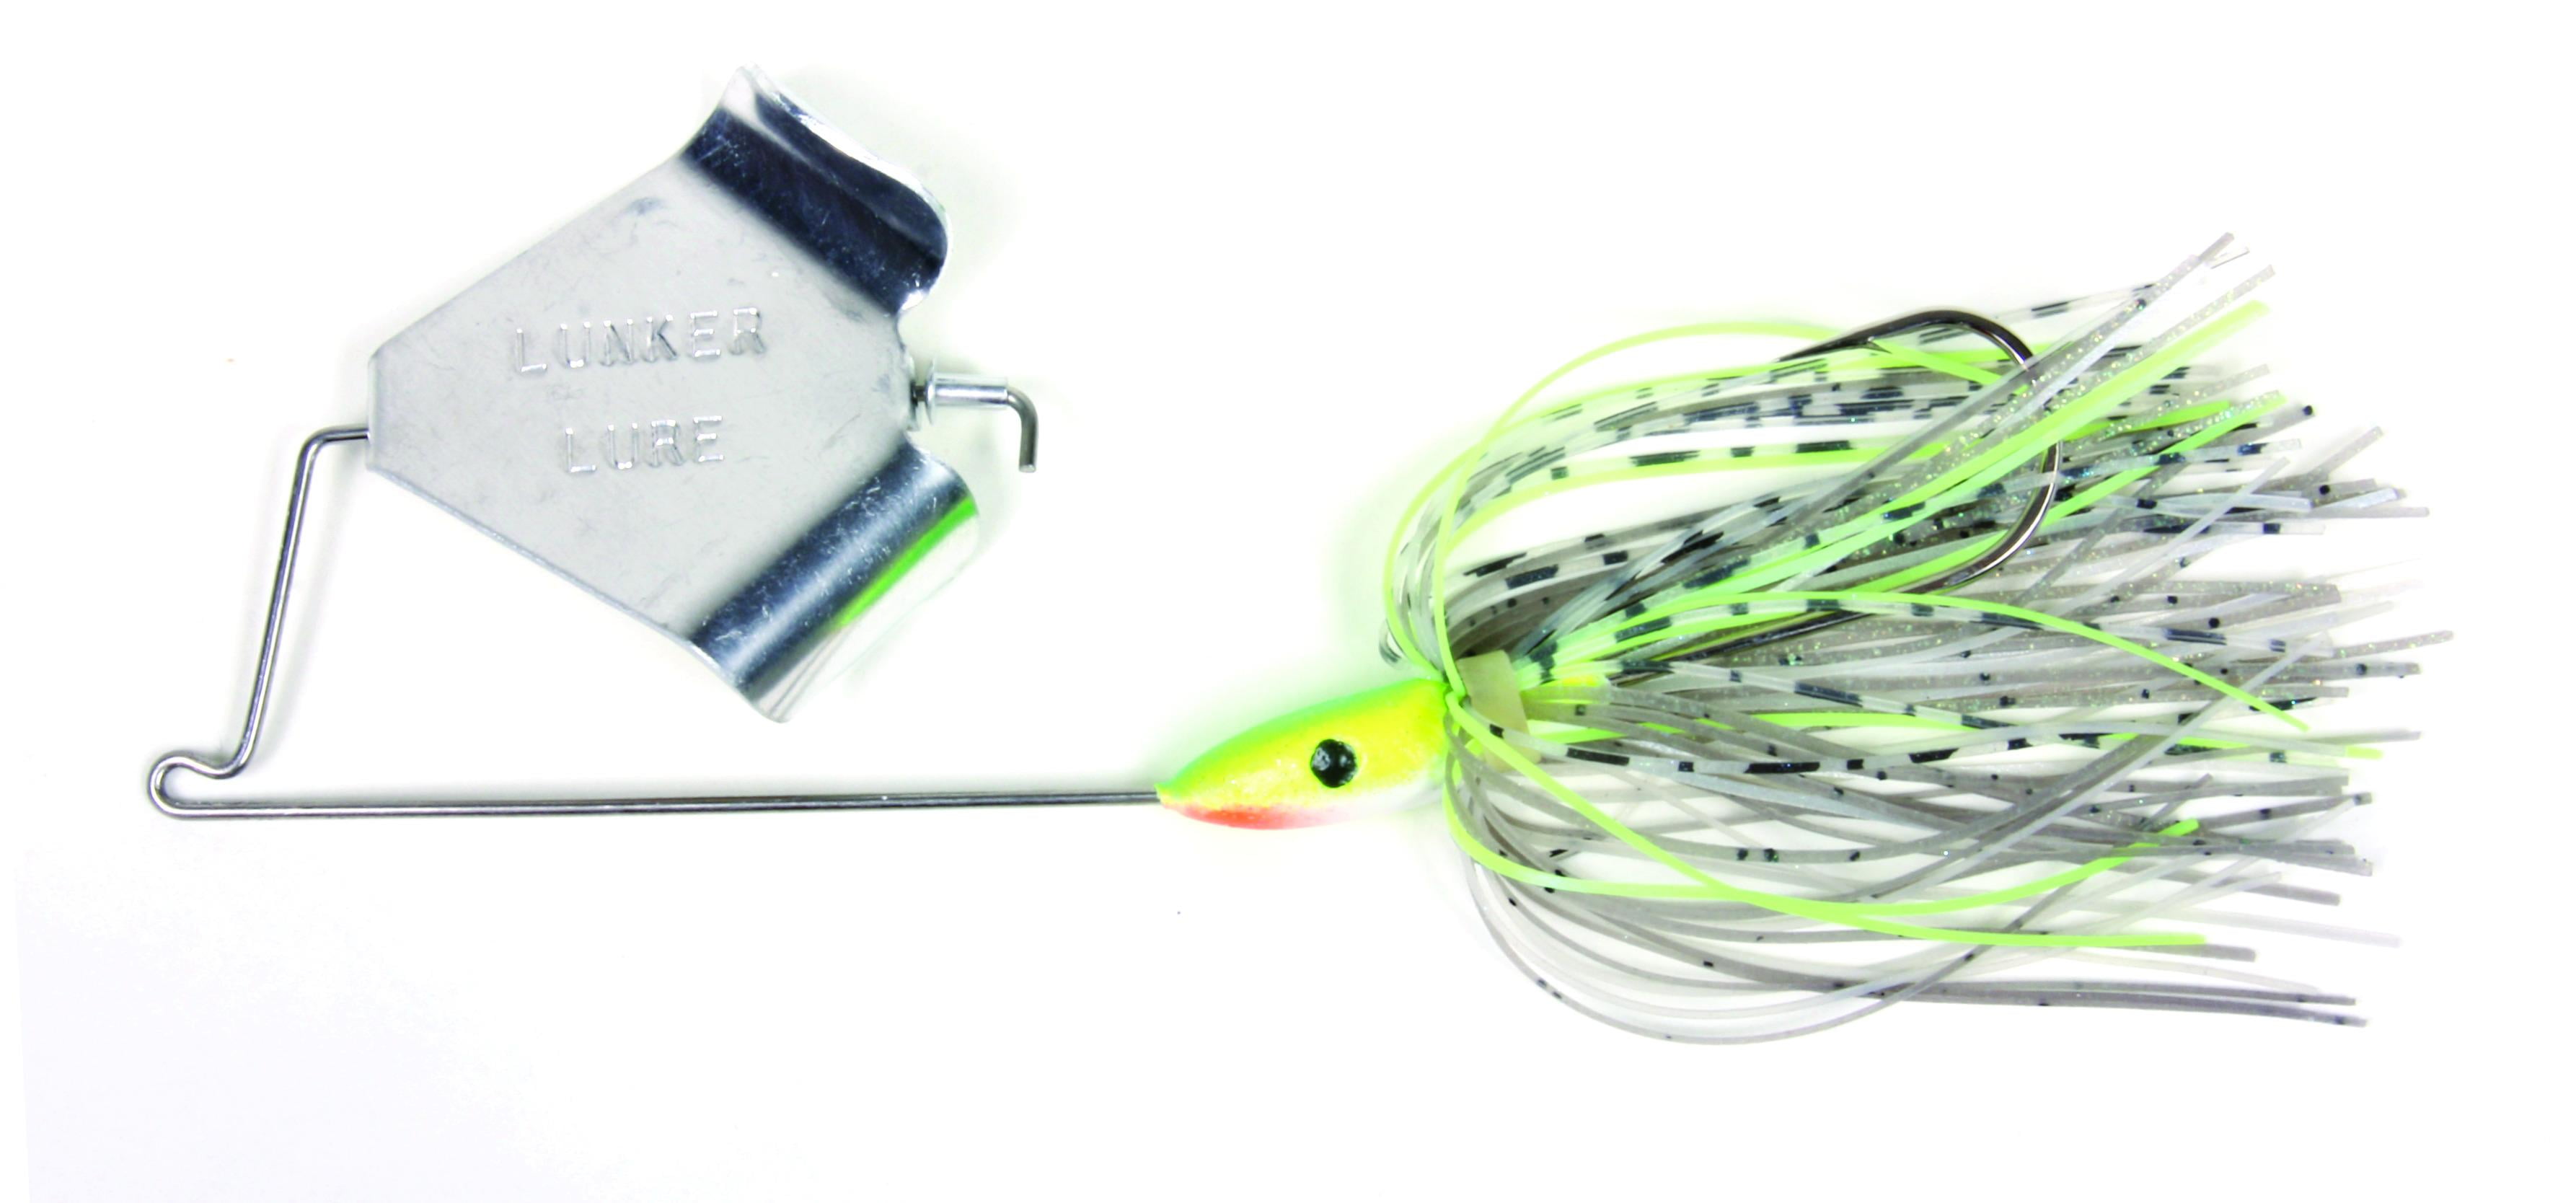 Lunker Lure 4212-2172 Original Buzz Bait 1/2 oz Sexy Shad And Silver Blade  